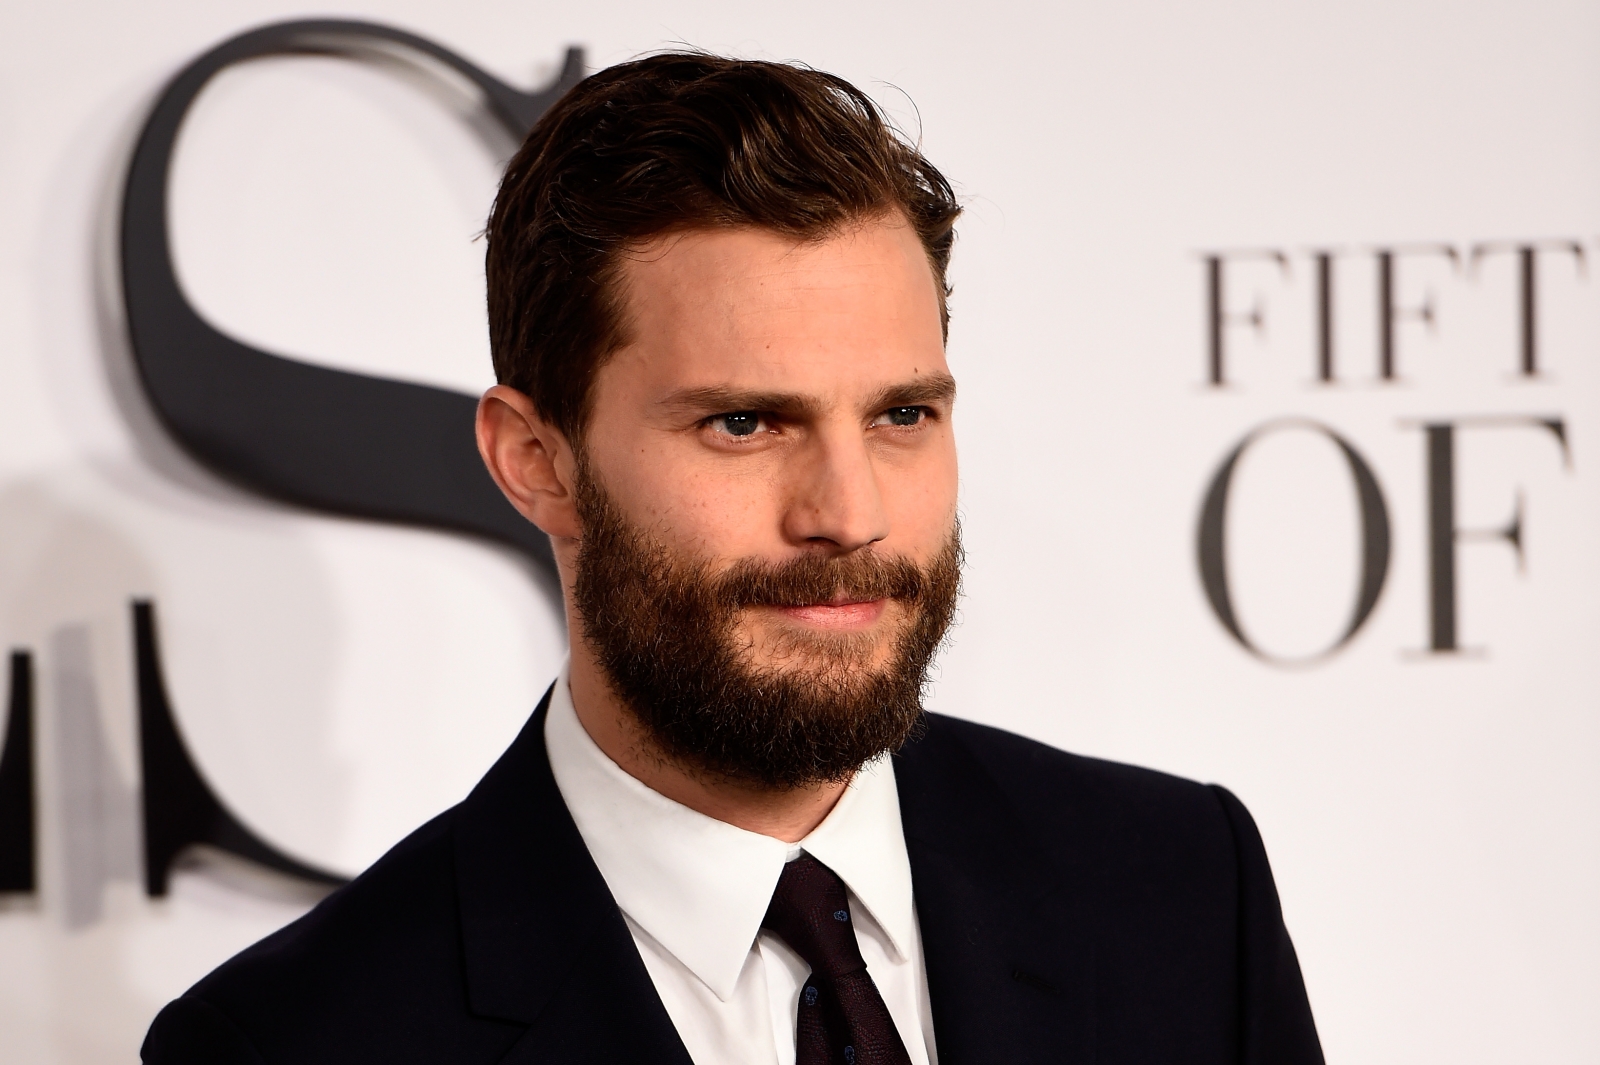 Fifty Shades Darker Star Jamie Dornan Reveals He Is Not Interested In 